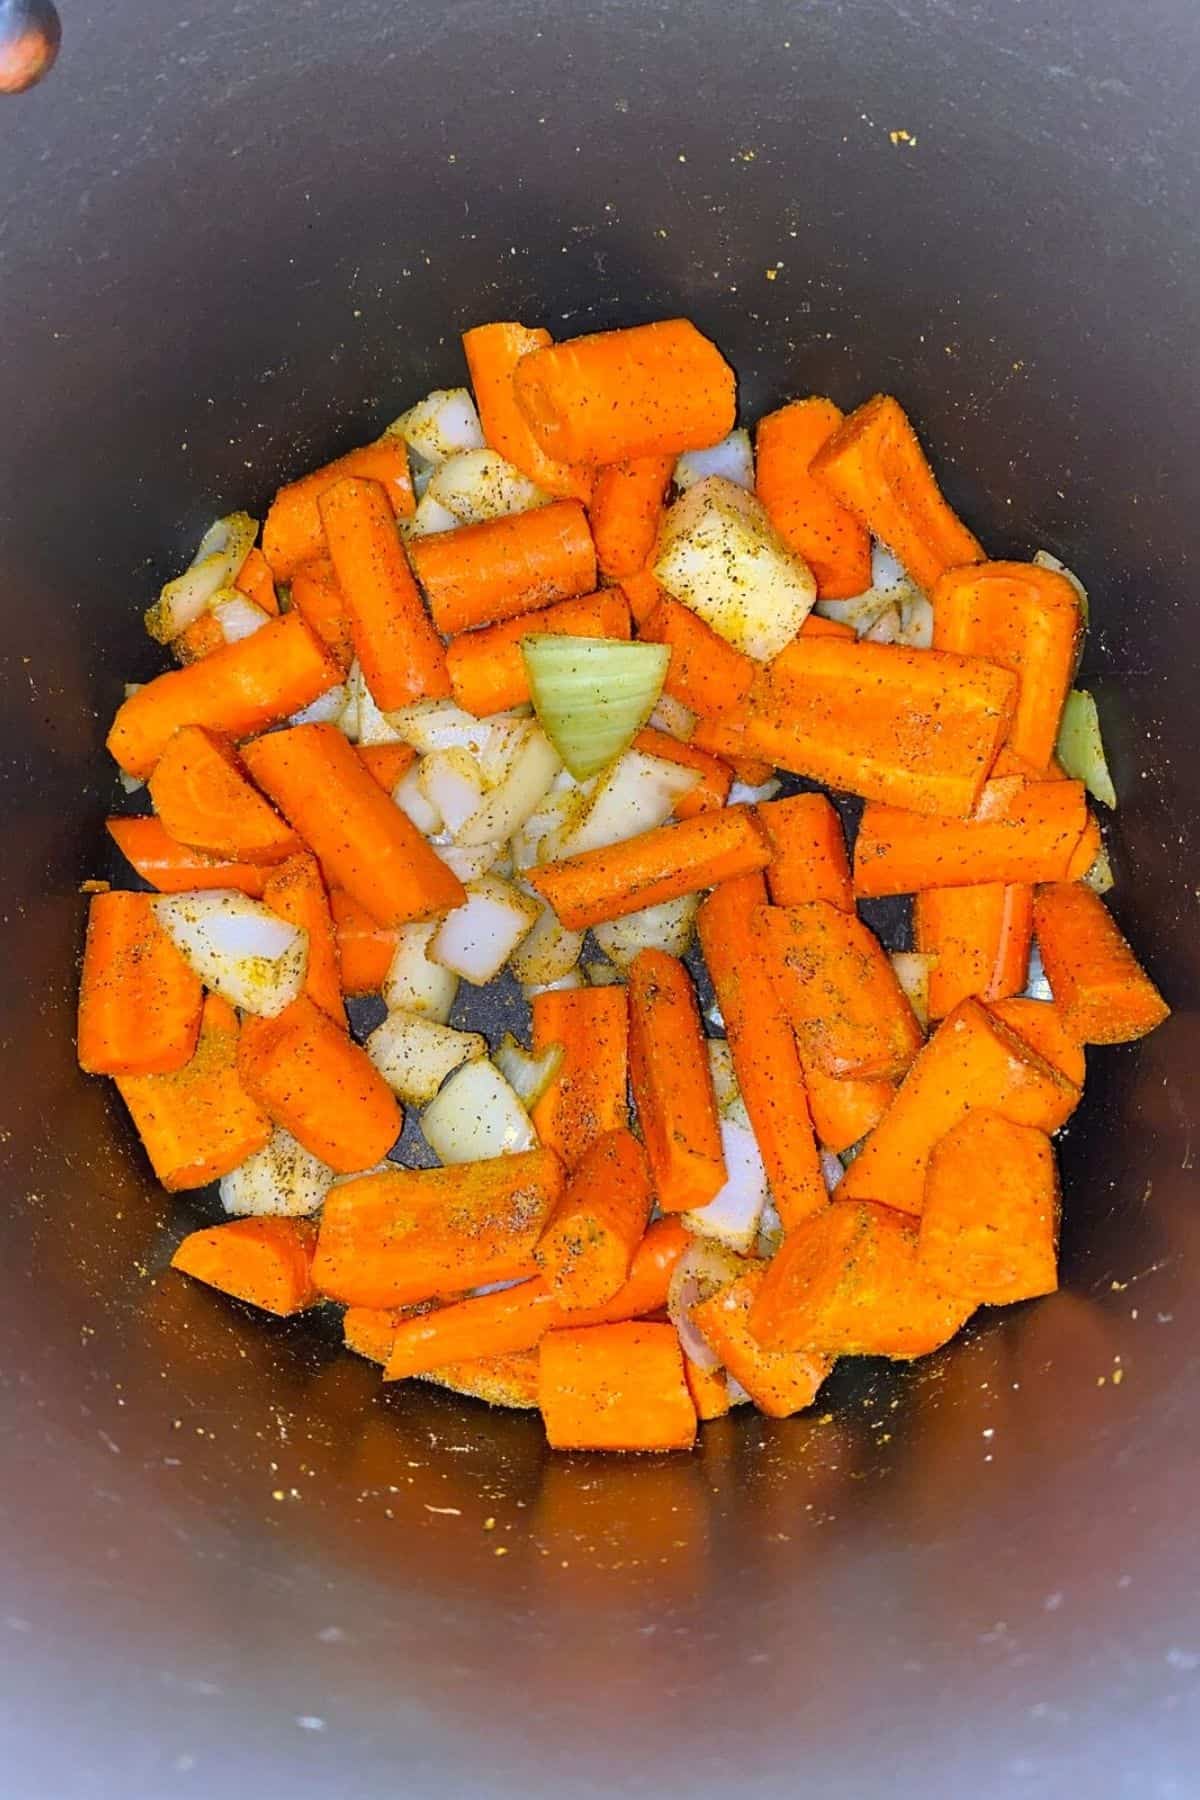 An overhead view of a pot with sliced carrots and onions with seasonings and vegetable broth poured over